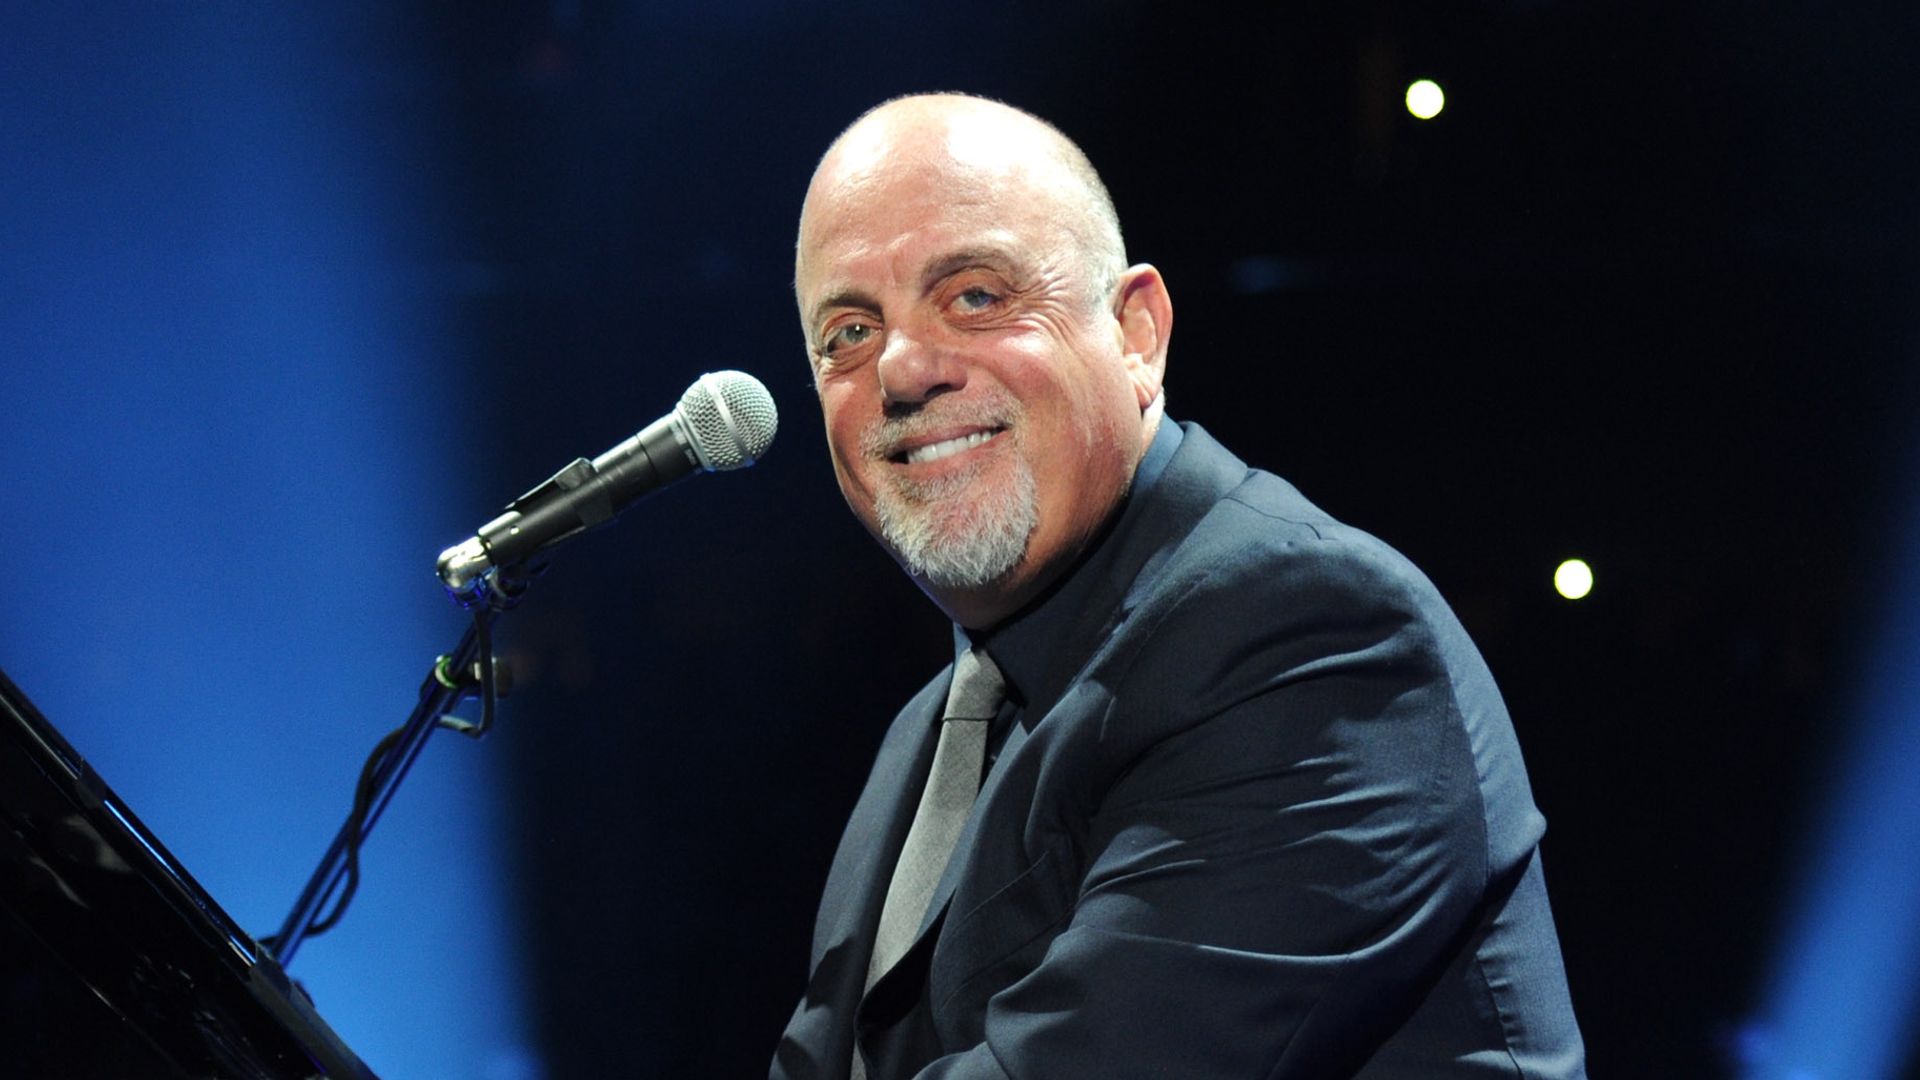 Billy Joel performs onstage celebrating his 65th birthday at Madison Square Garden on May 9, 2014 in New York City.